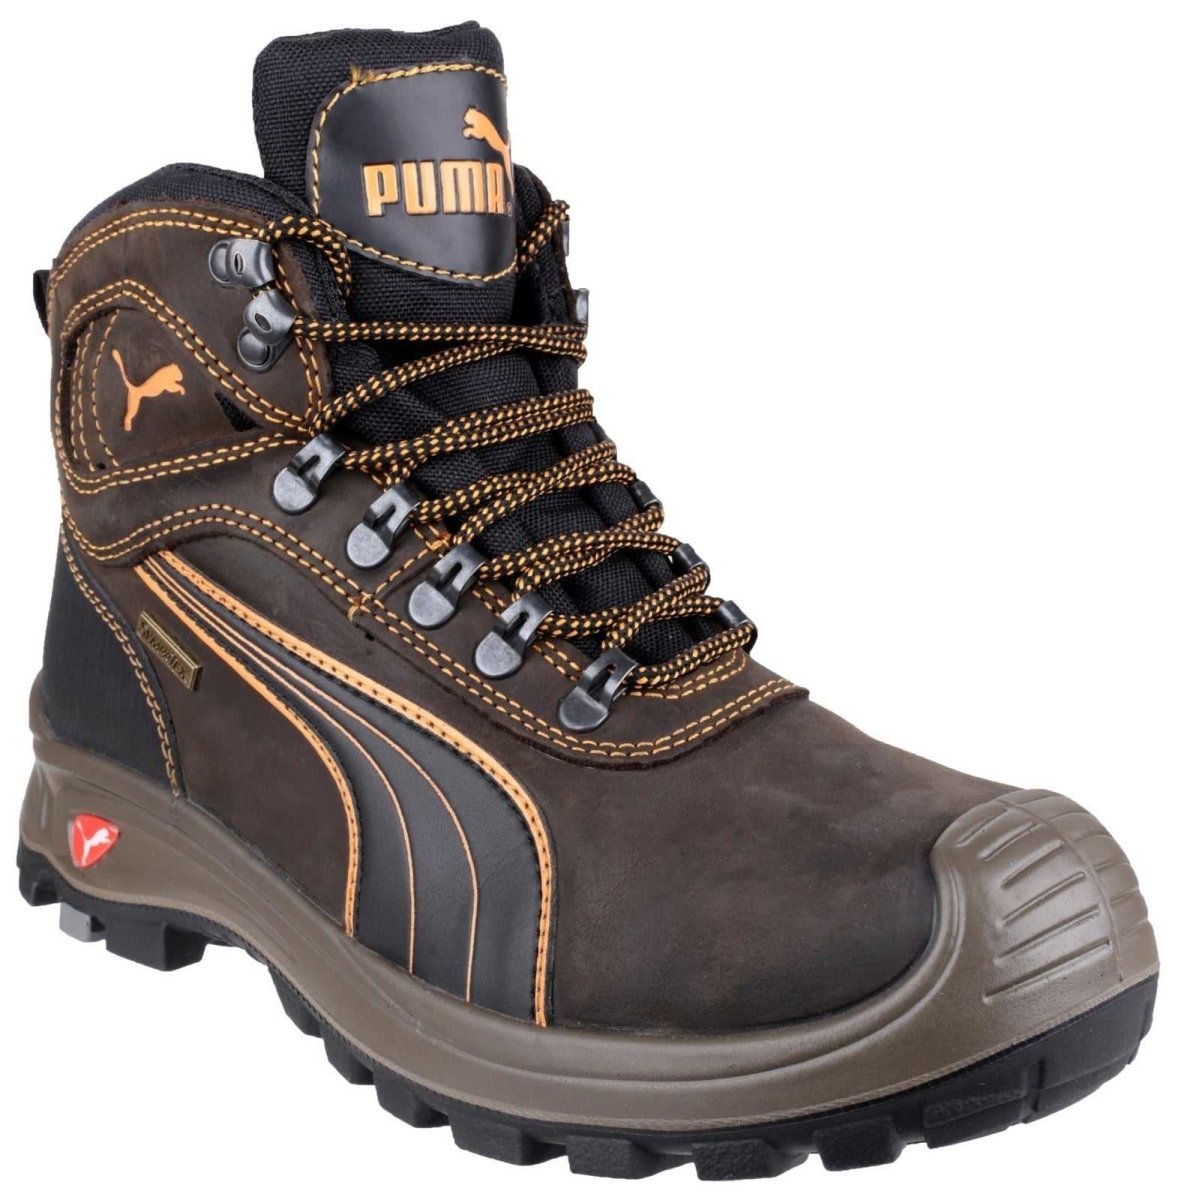 Puma Sierra Nevada Mid Safety Boots - Shoe Store Direct